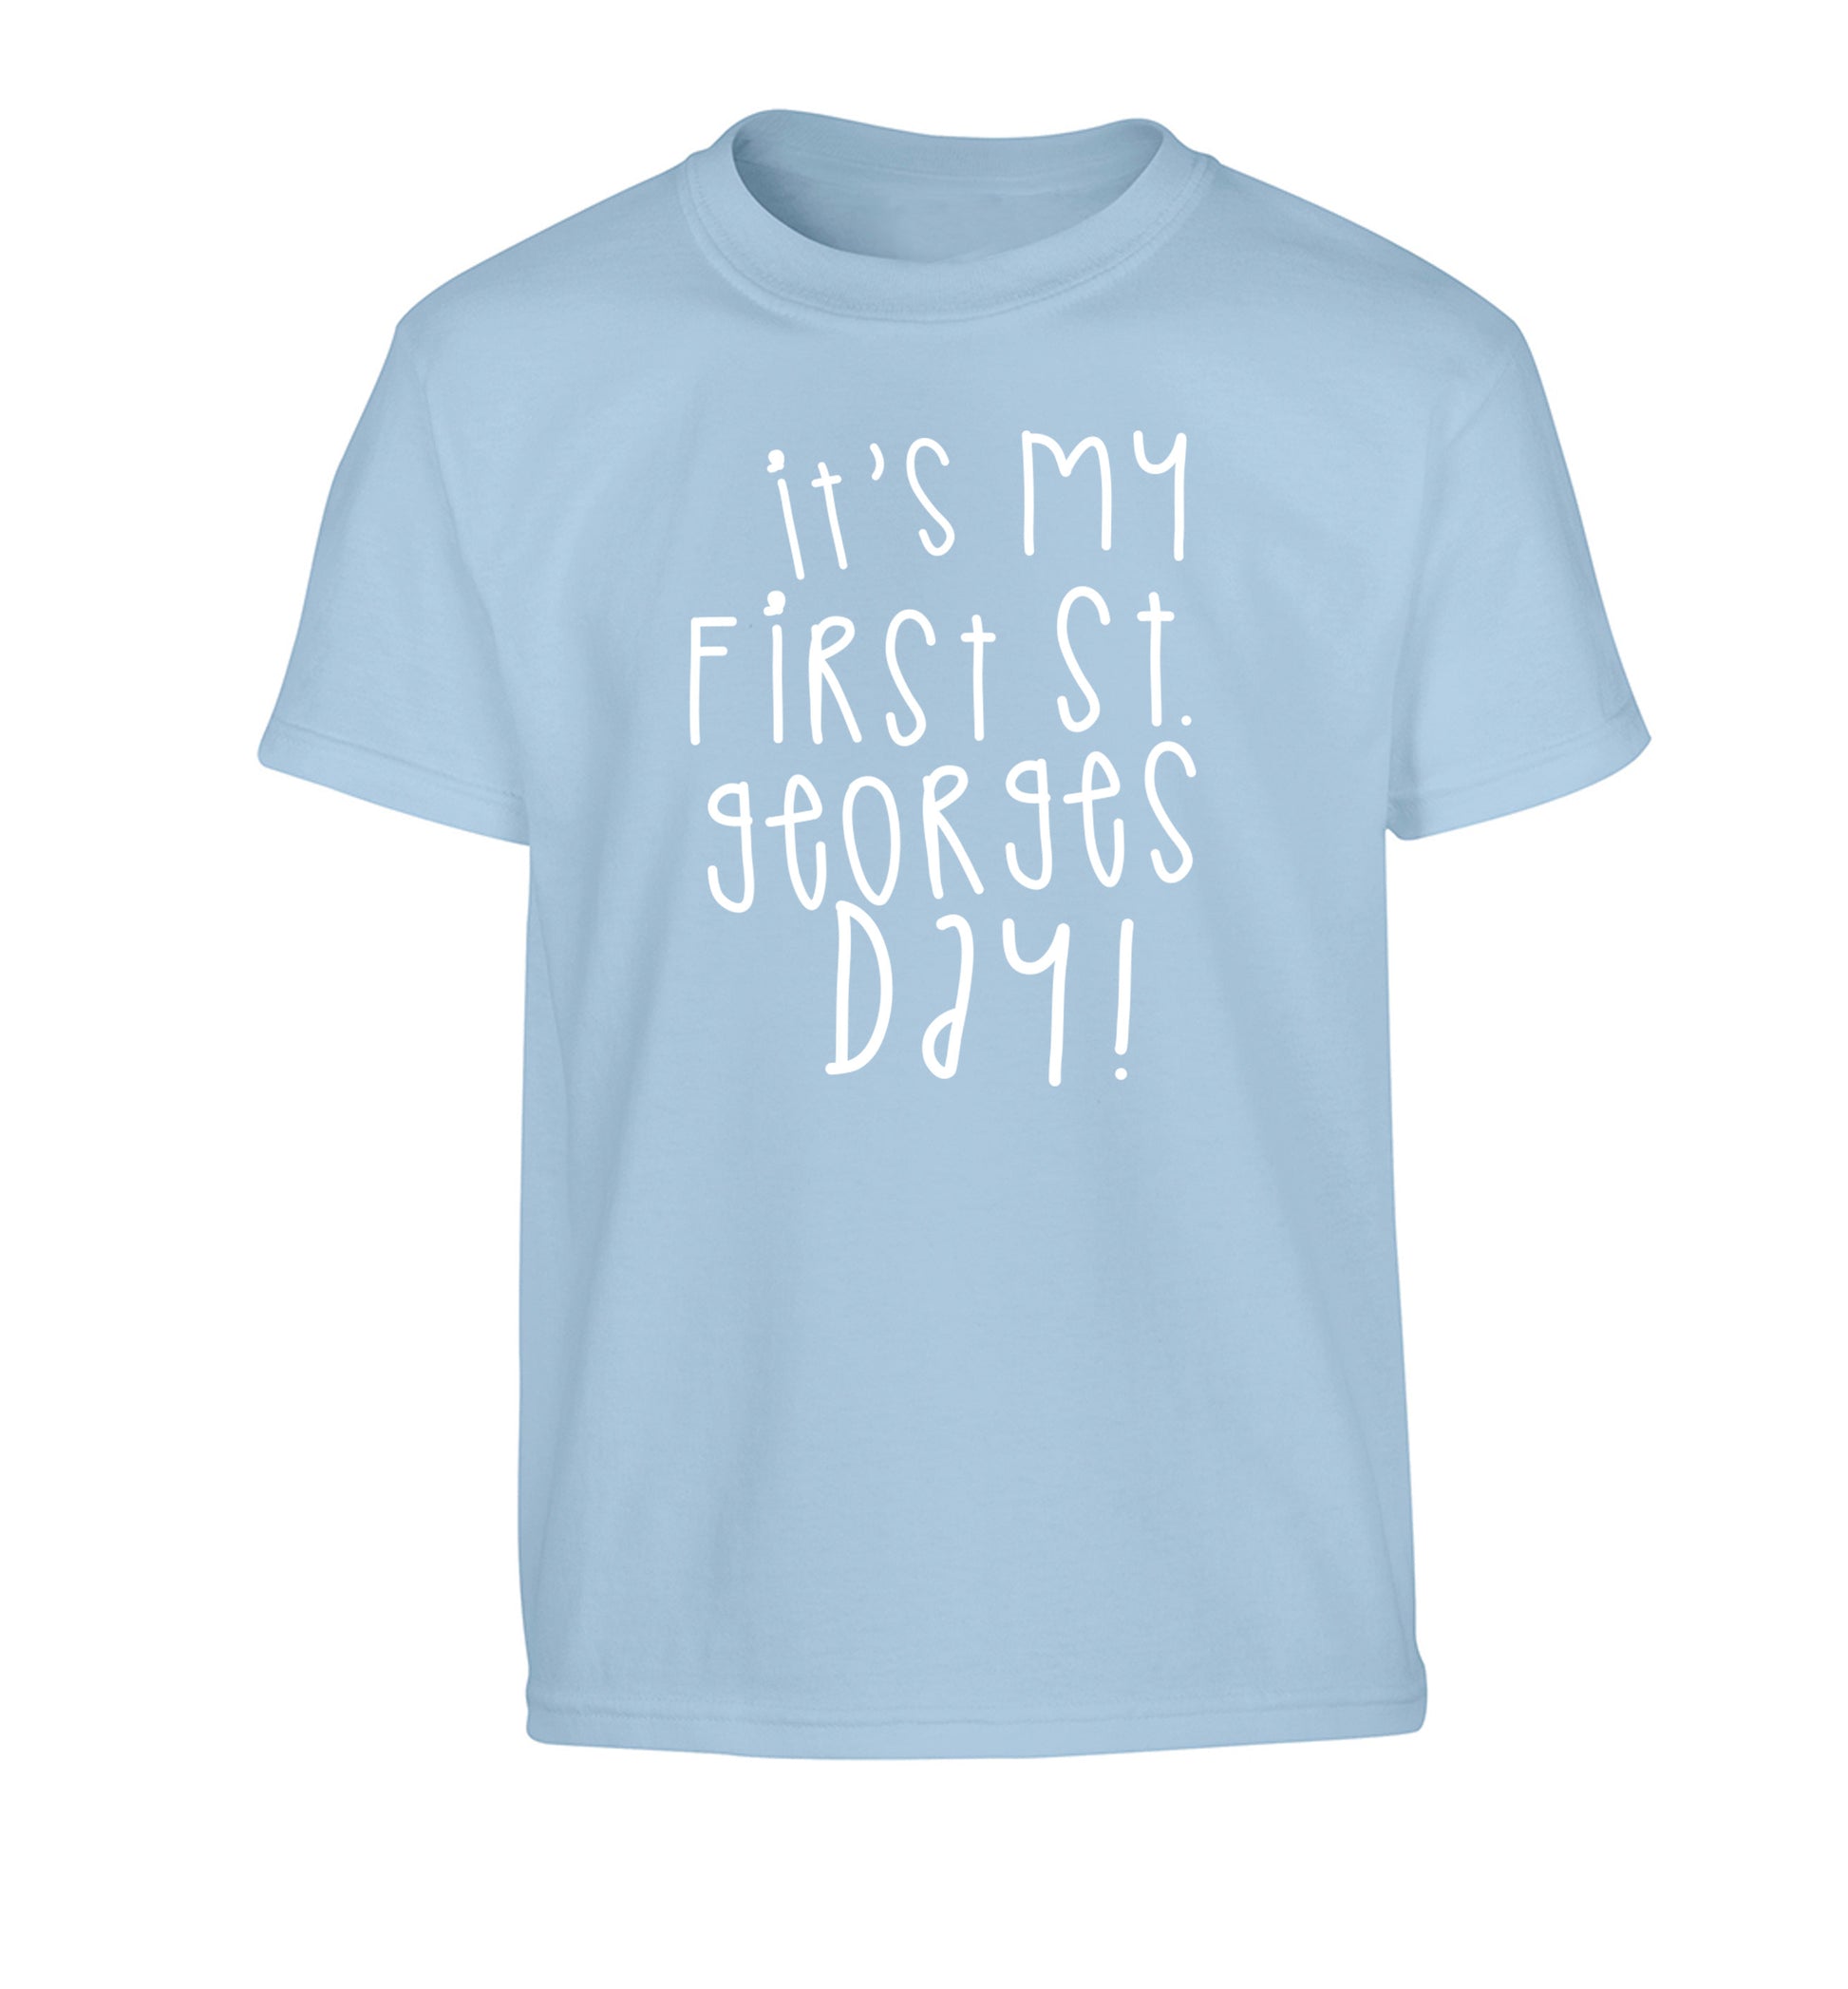 It's my first St Georges day Children's light blue Tshirt 12-14 Years